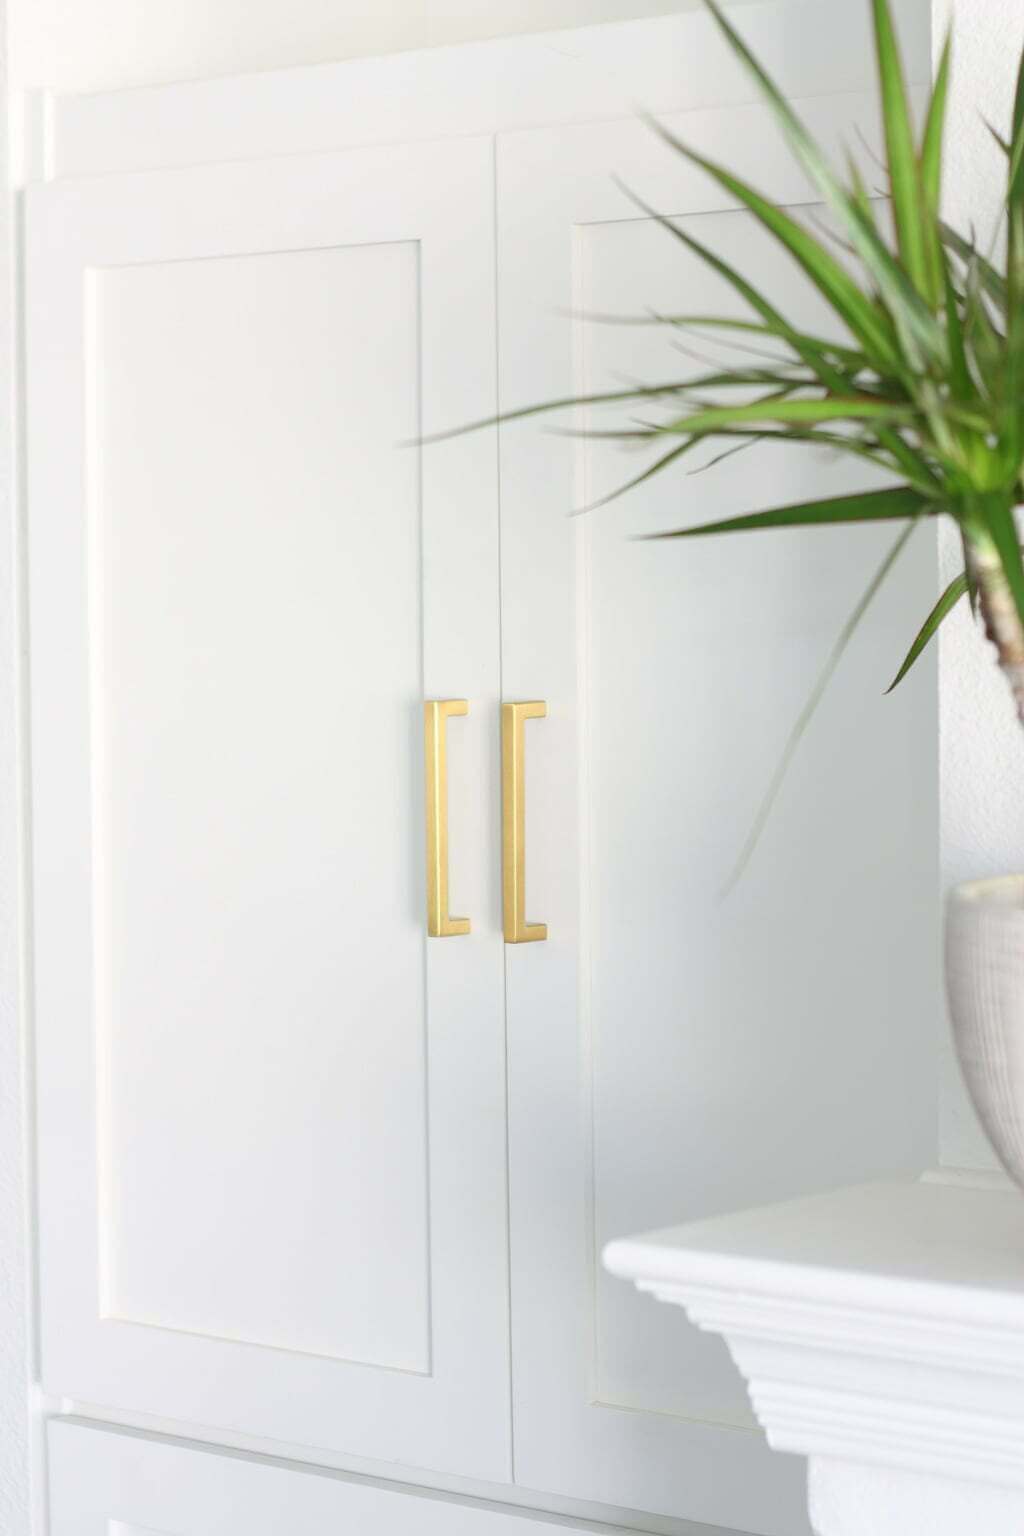 DIY bookcase makeover with white shaker cabinet doors and brass pulls